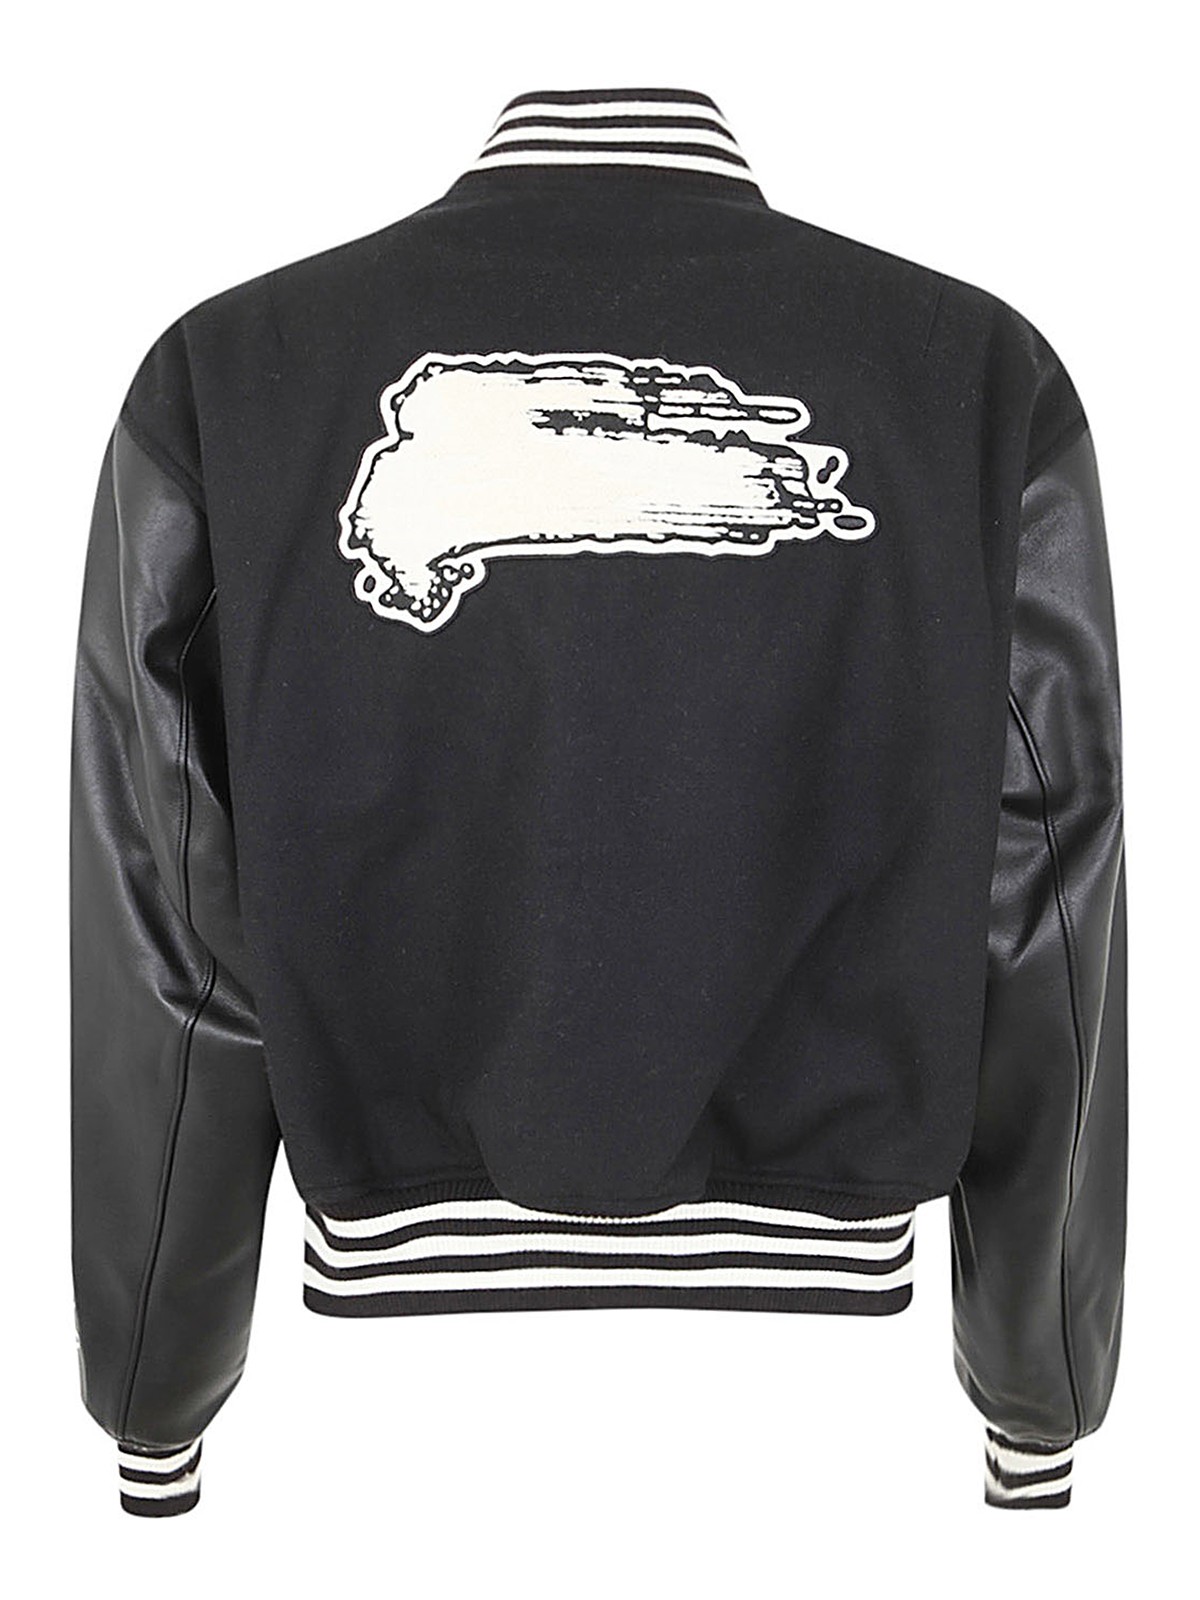 Buy Letter Jackets Online at Best Prices